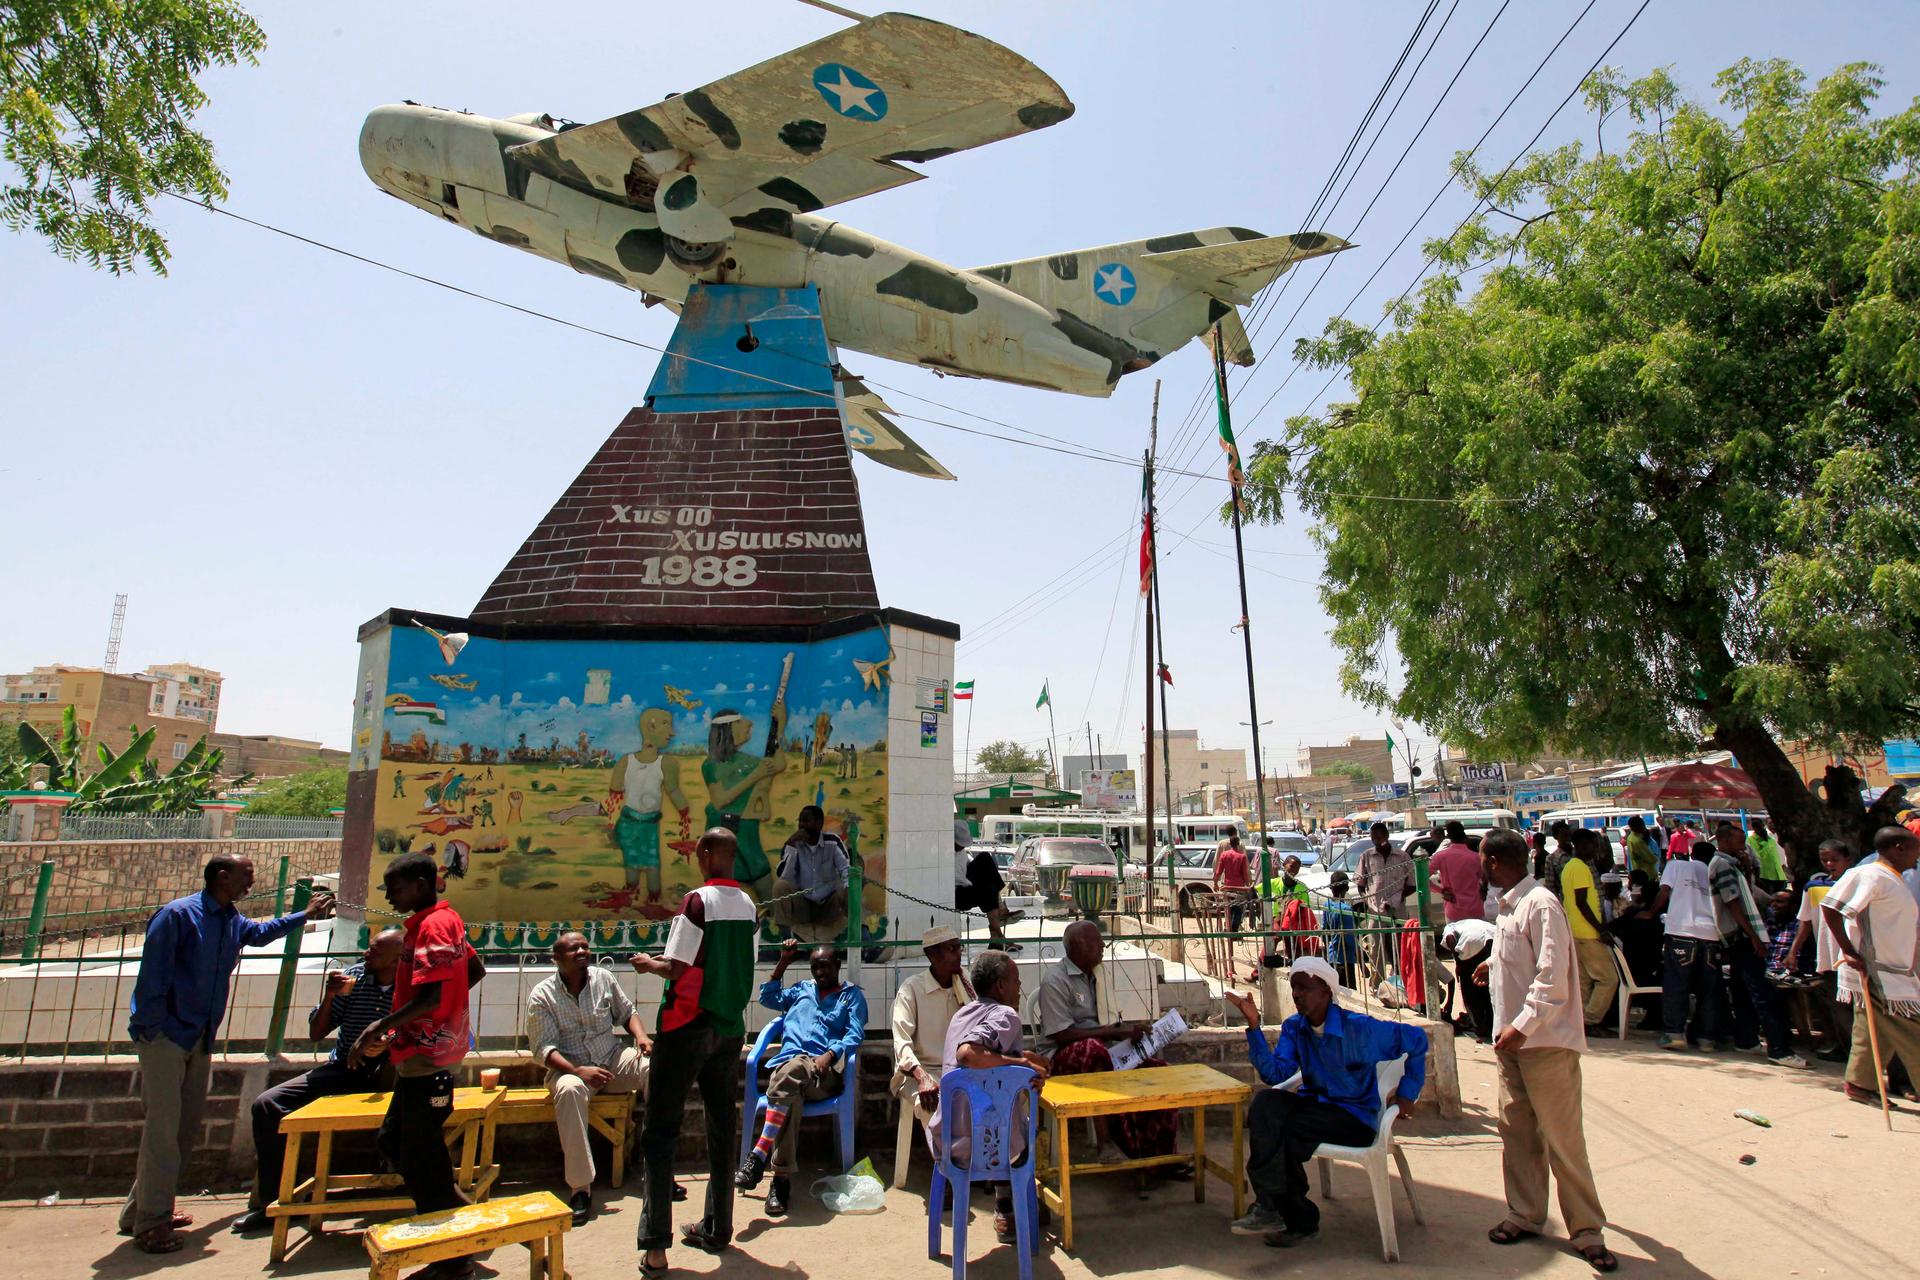 People stand underneath a war memorial in shape of airplane.